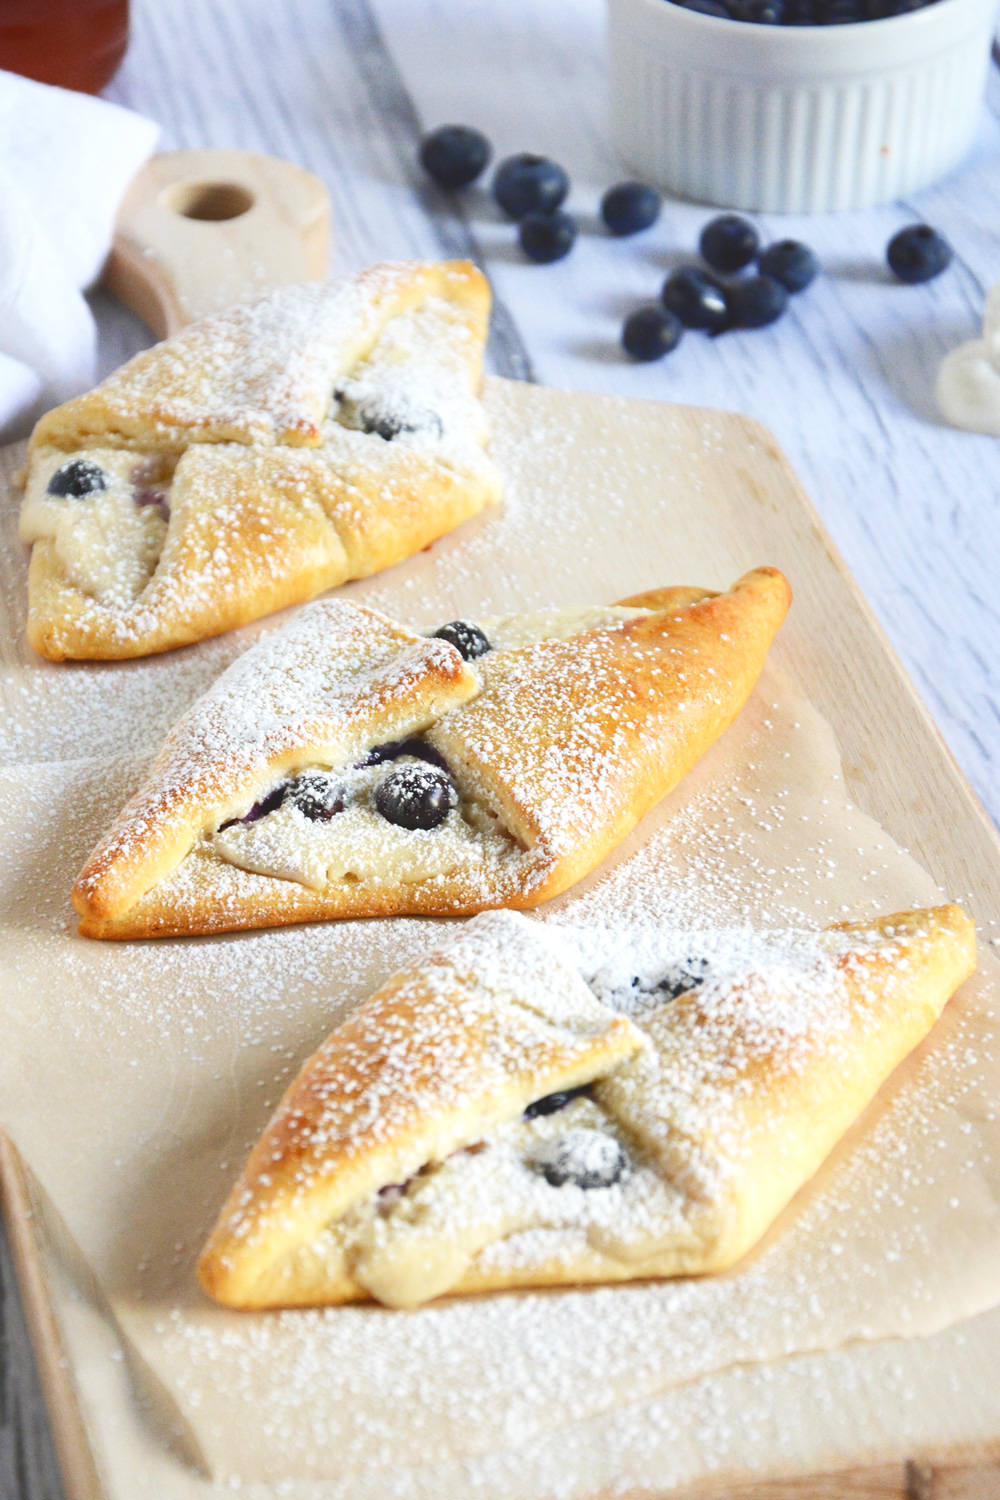 Buttery and flakey croissants filled with whipped honey cream cheese and tart blueberries are the perfect breakfast!